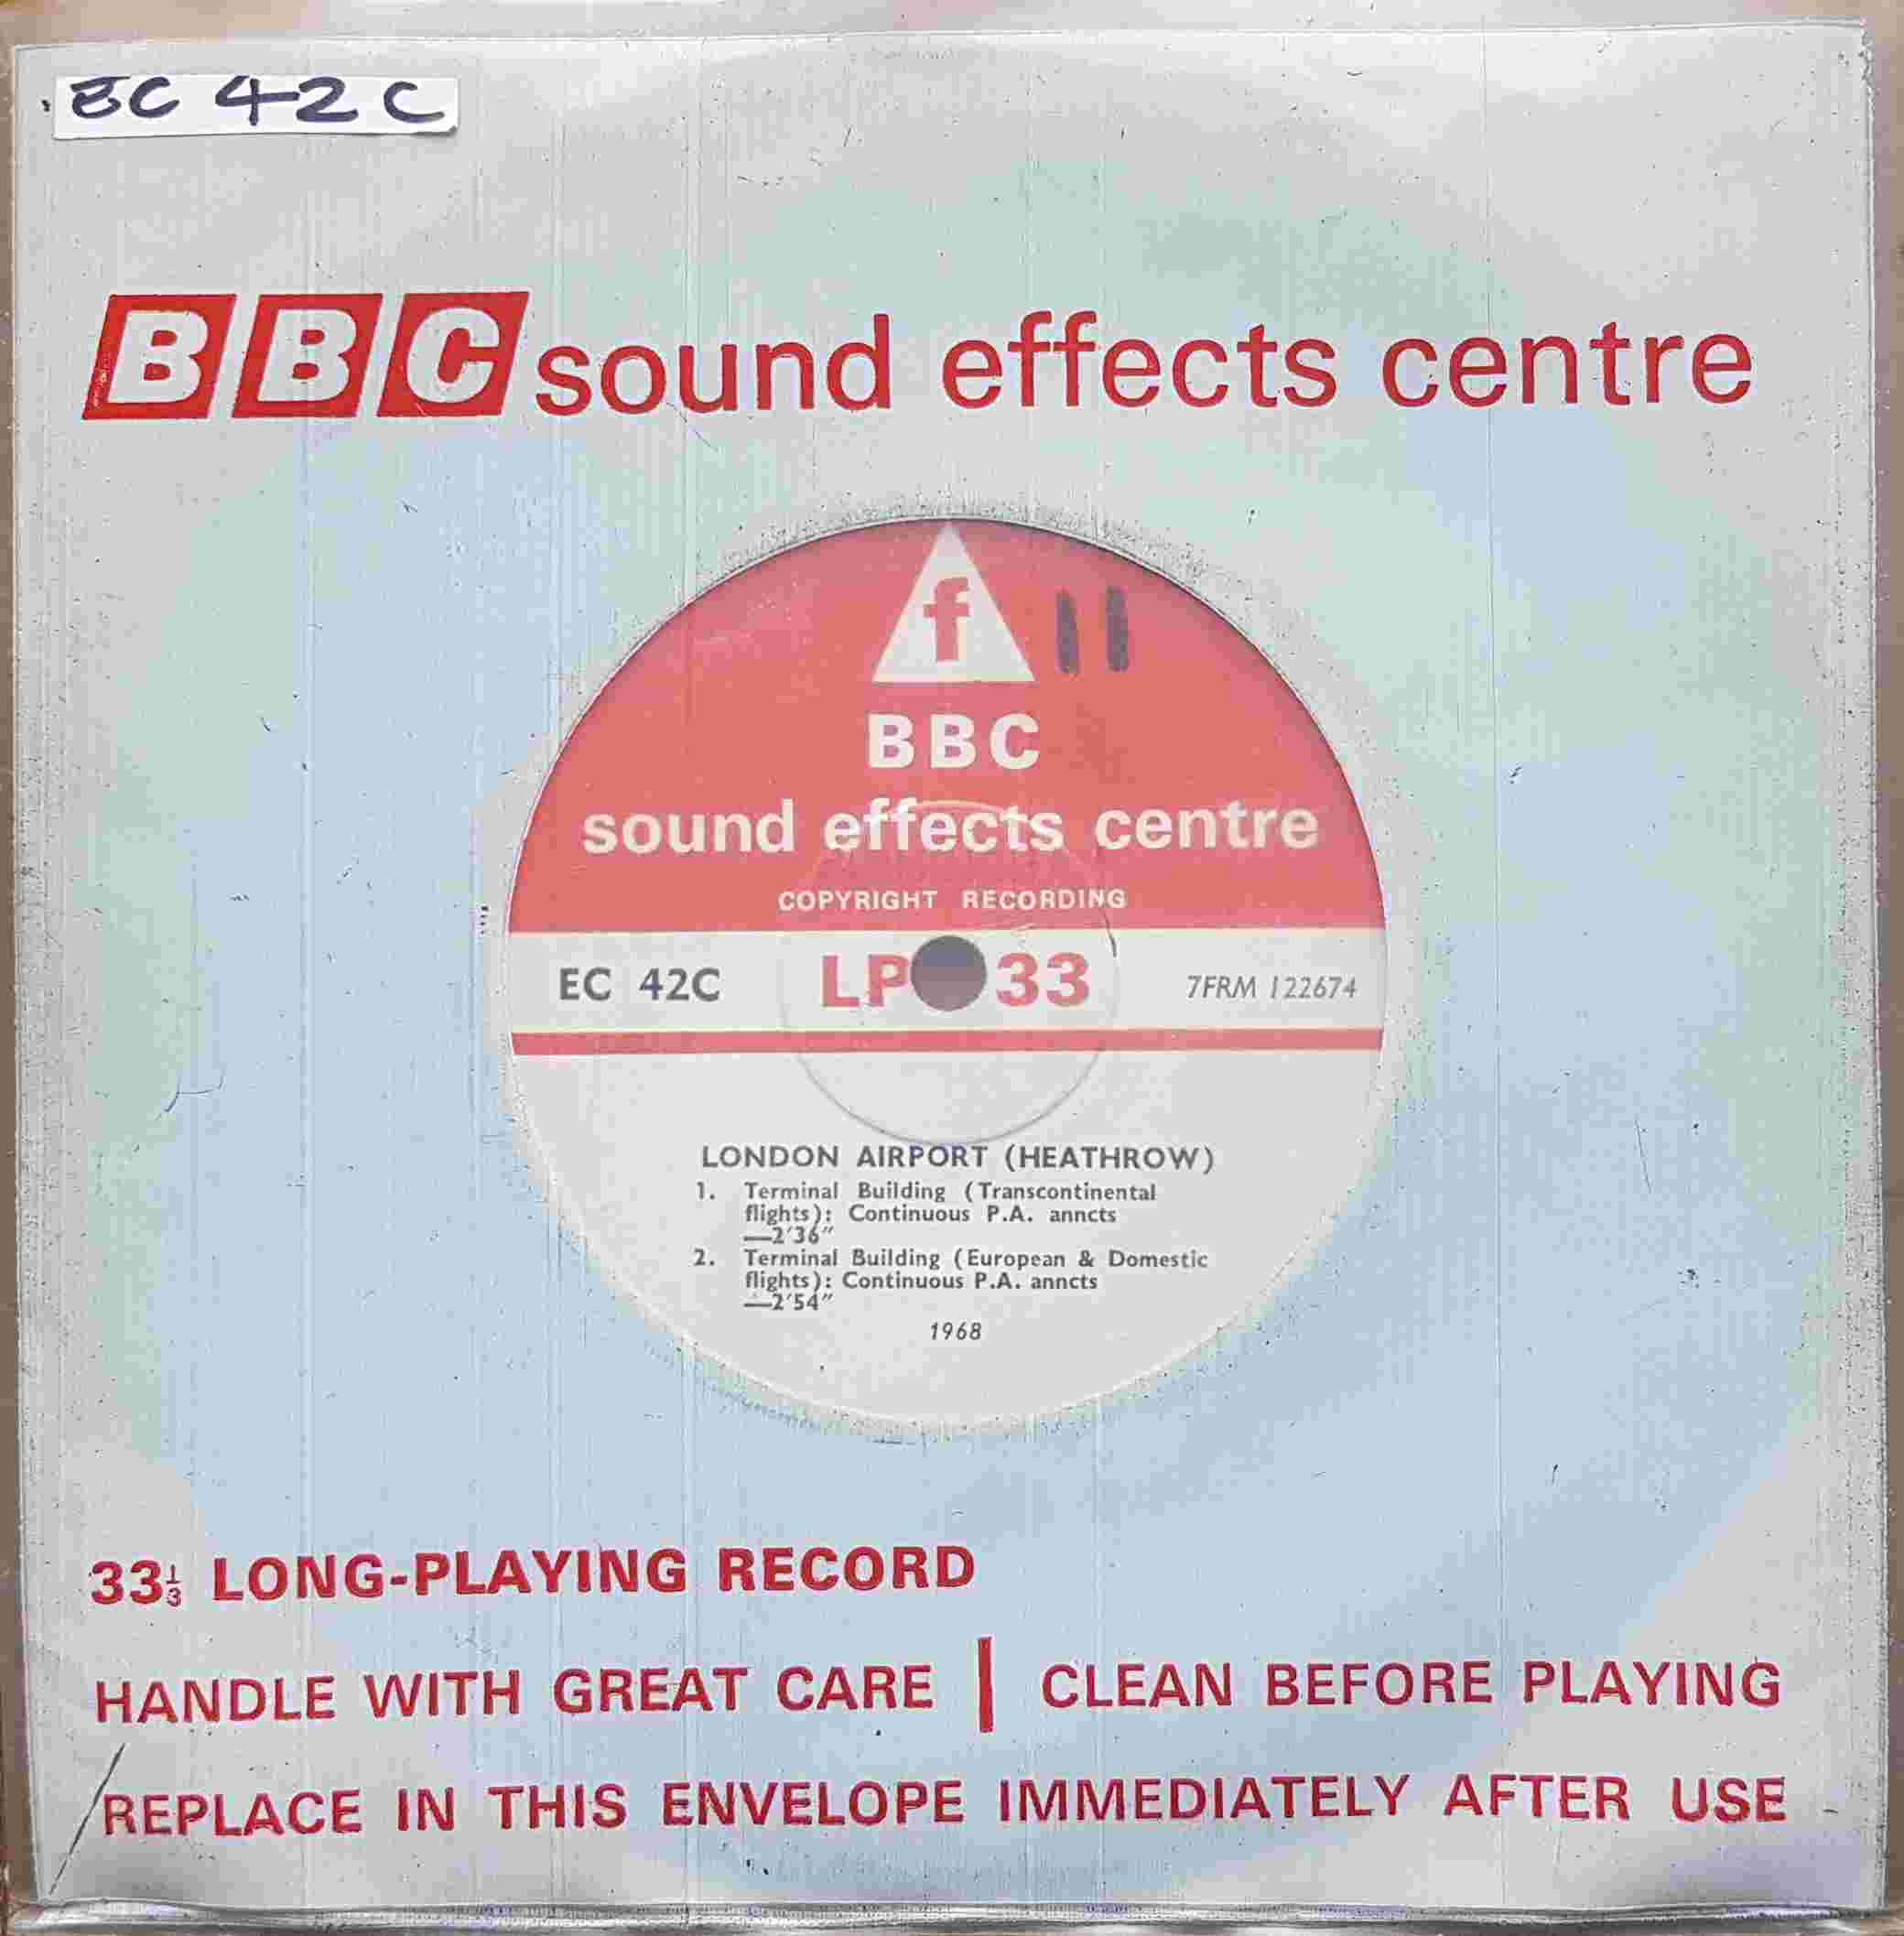 Picture of EC 42C London airport (Heathrow) -1968 by artist Not registered from the BBC singles - Records and Tapes library